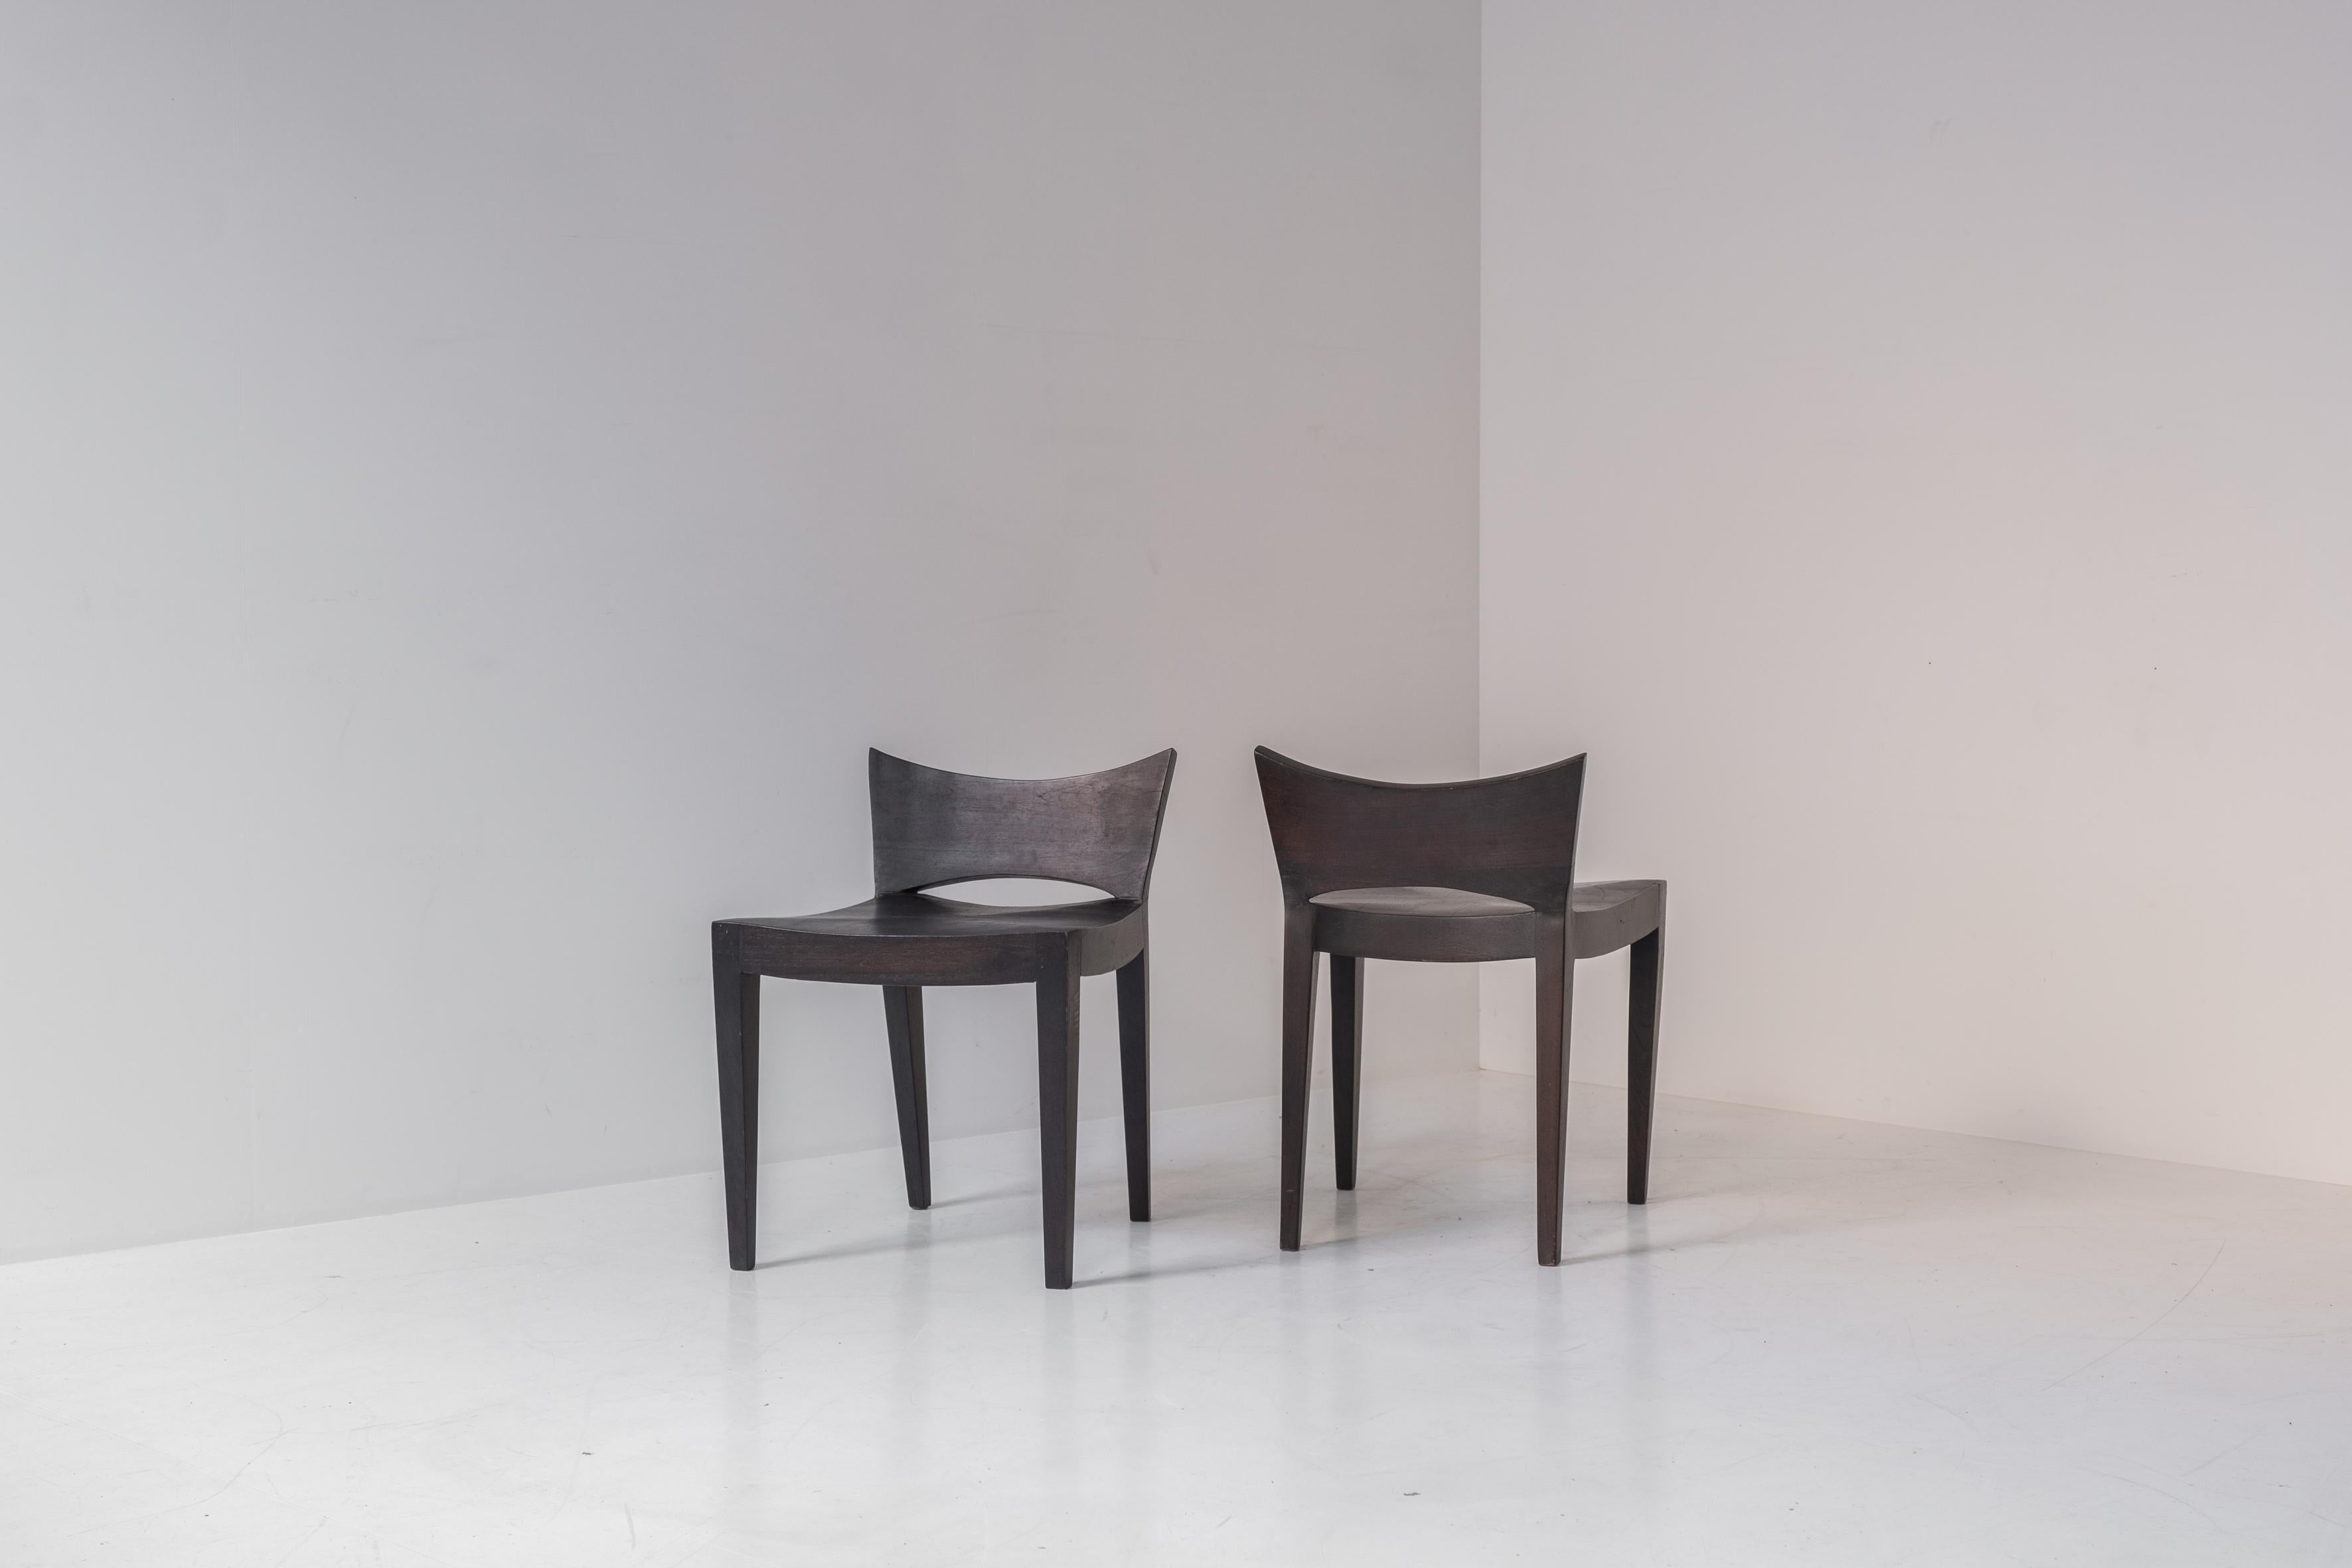 French Modernist Dining Chairs in Stained Oak from France, Dating from the 1960s For Sale